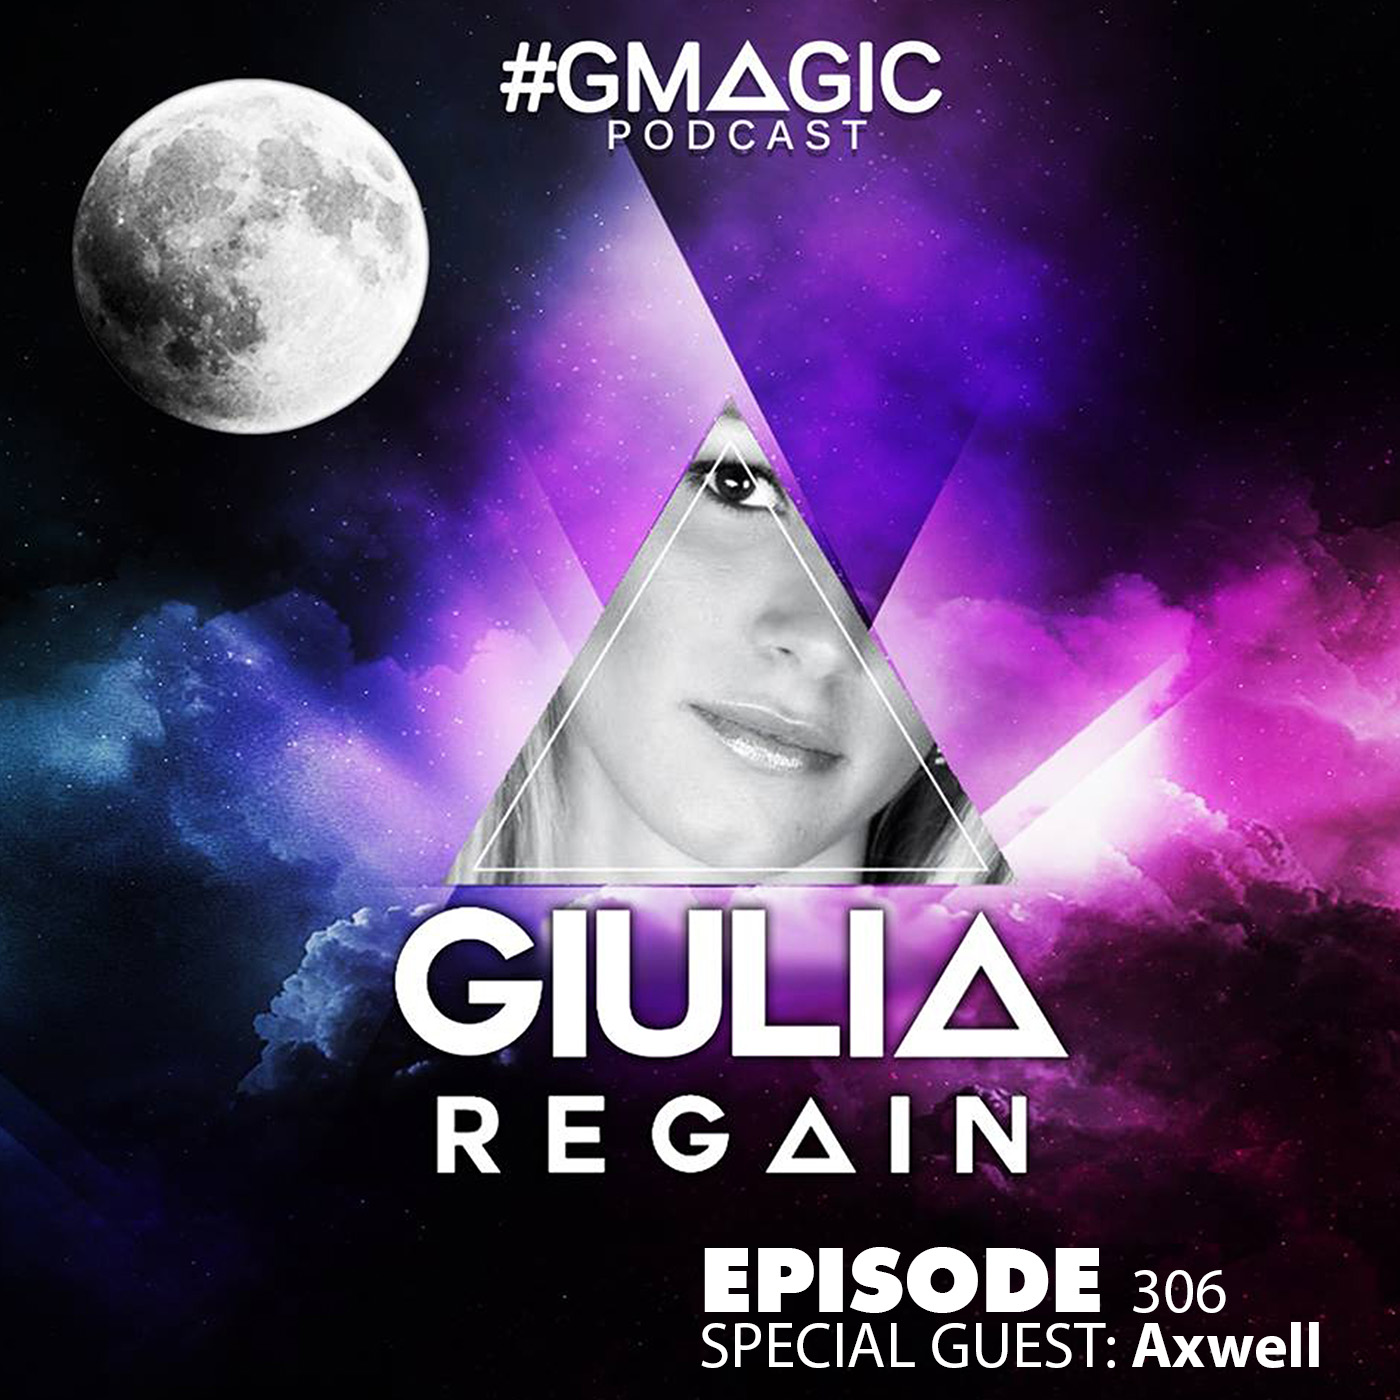 #Gmagic Podcast 306 - Special Guest: Axwell